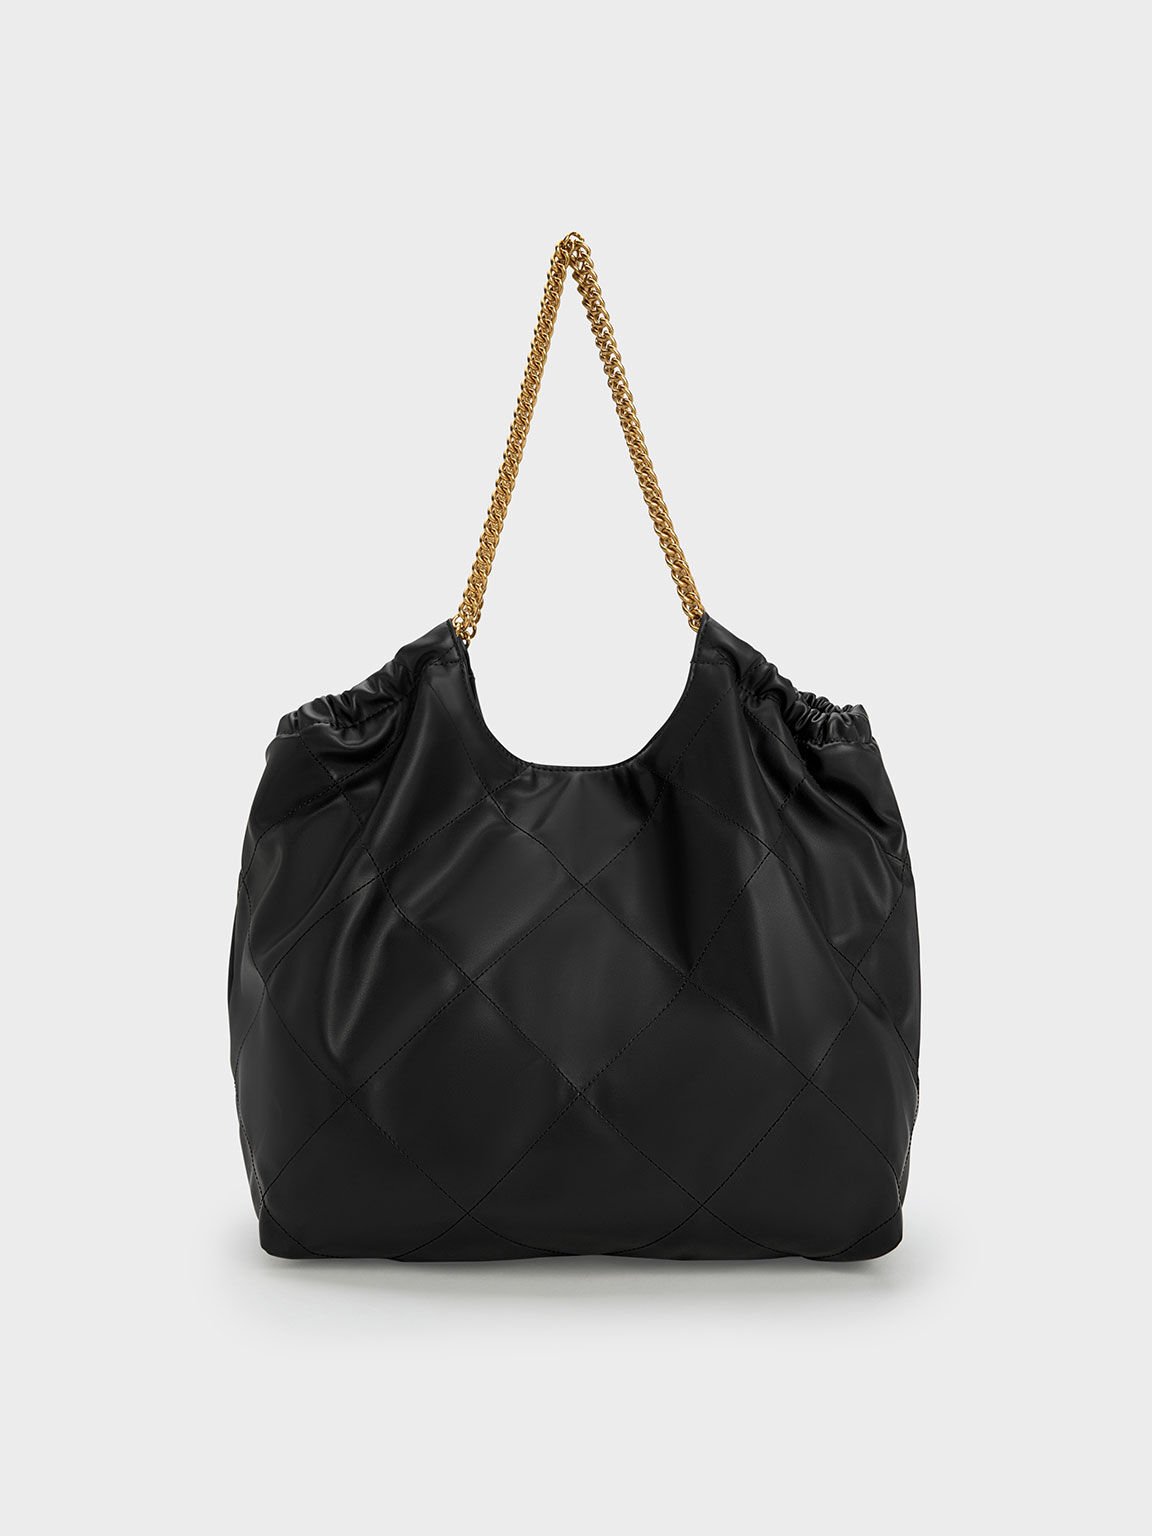  Charles And Keith Handbags For Women